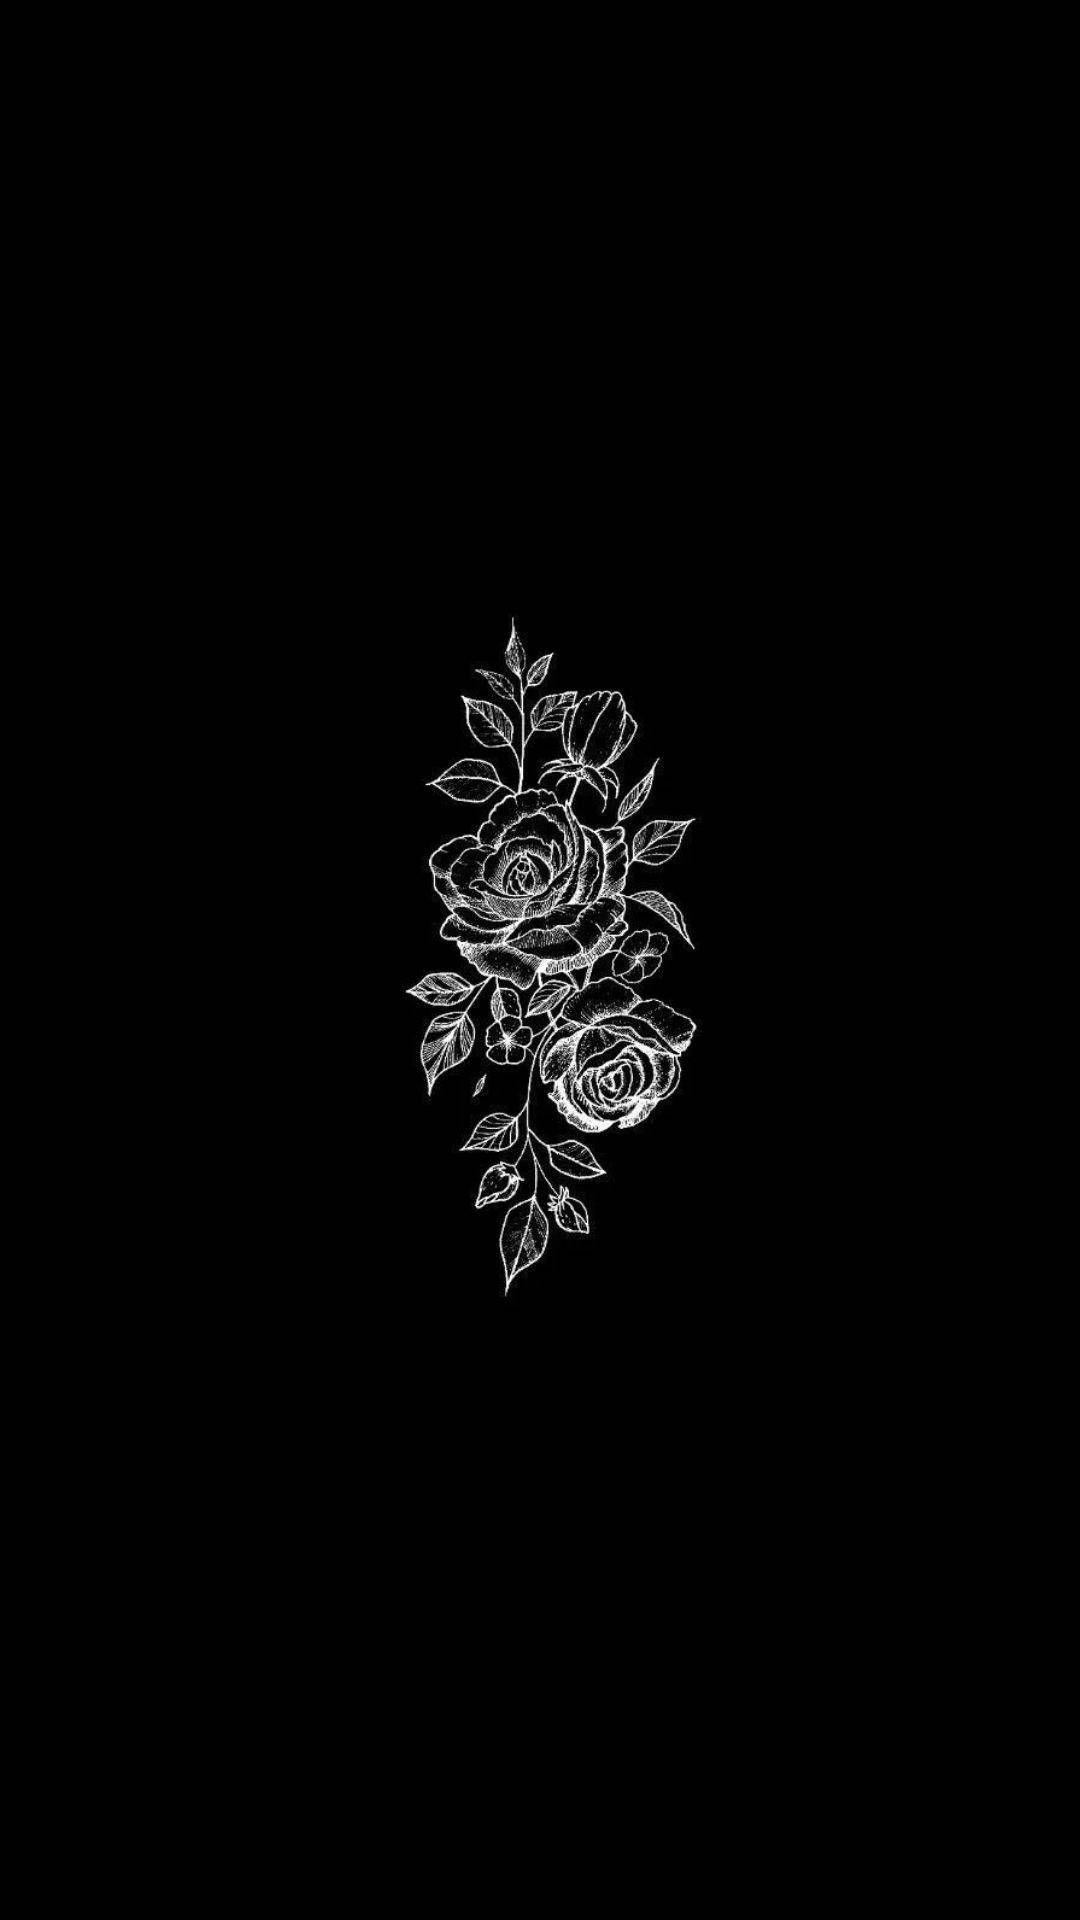 A black and white image of flowers - Profile picture